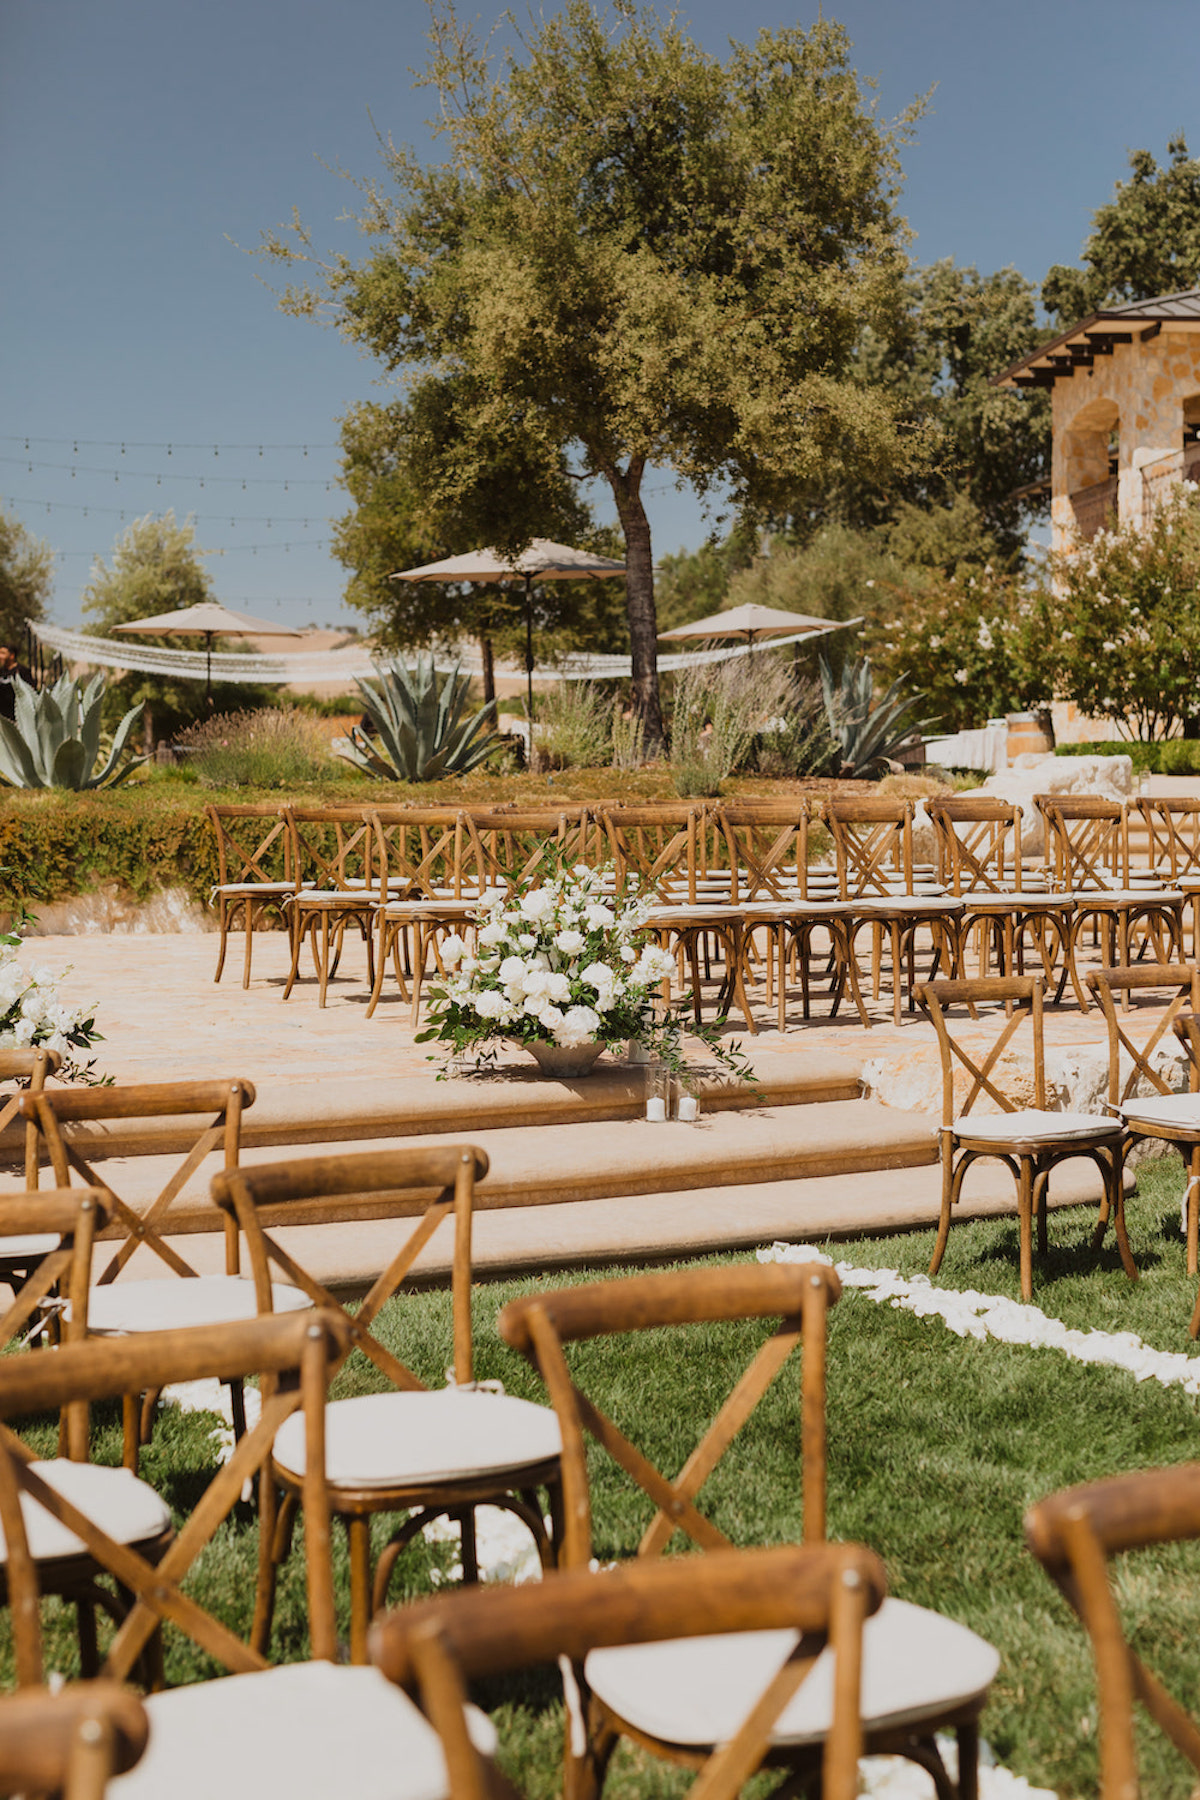 Extravagance?  Elegance?  Yes, please! Classic Black Tie Gets Contemporary Touches at This Vineyard Wedding in Paso Robles